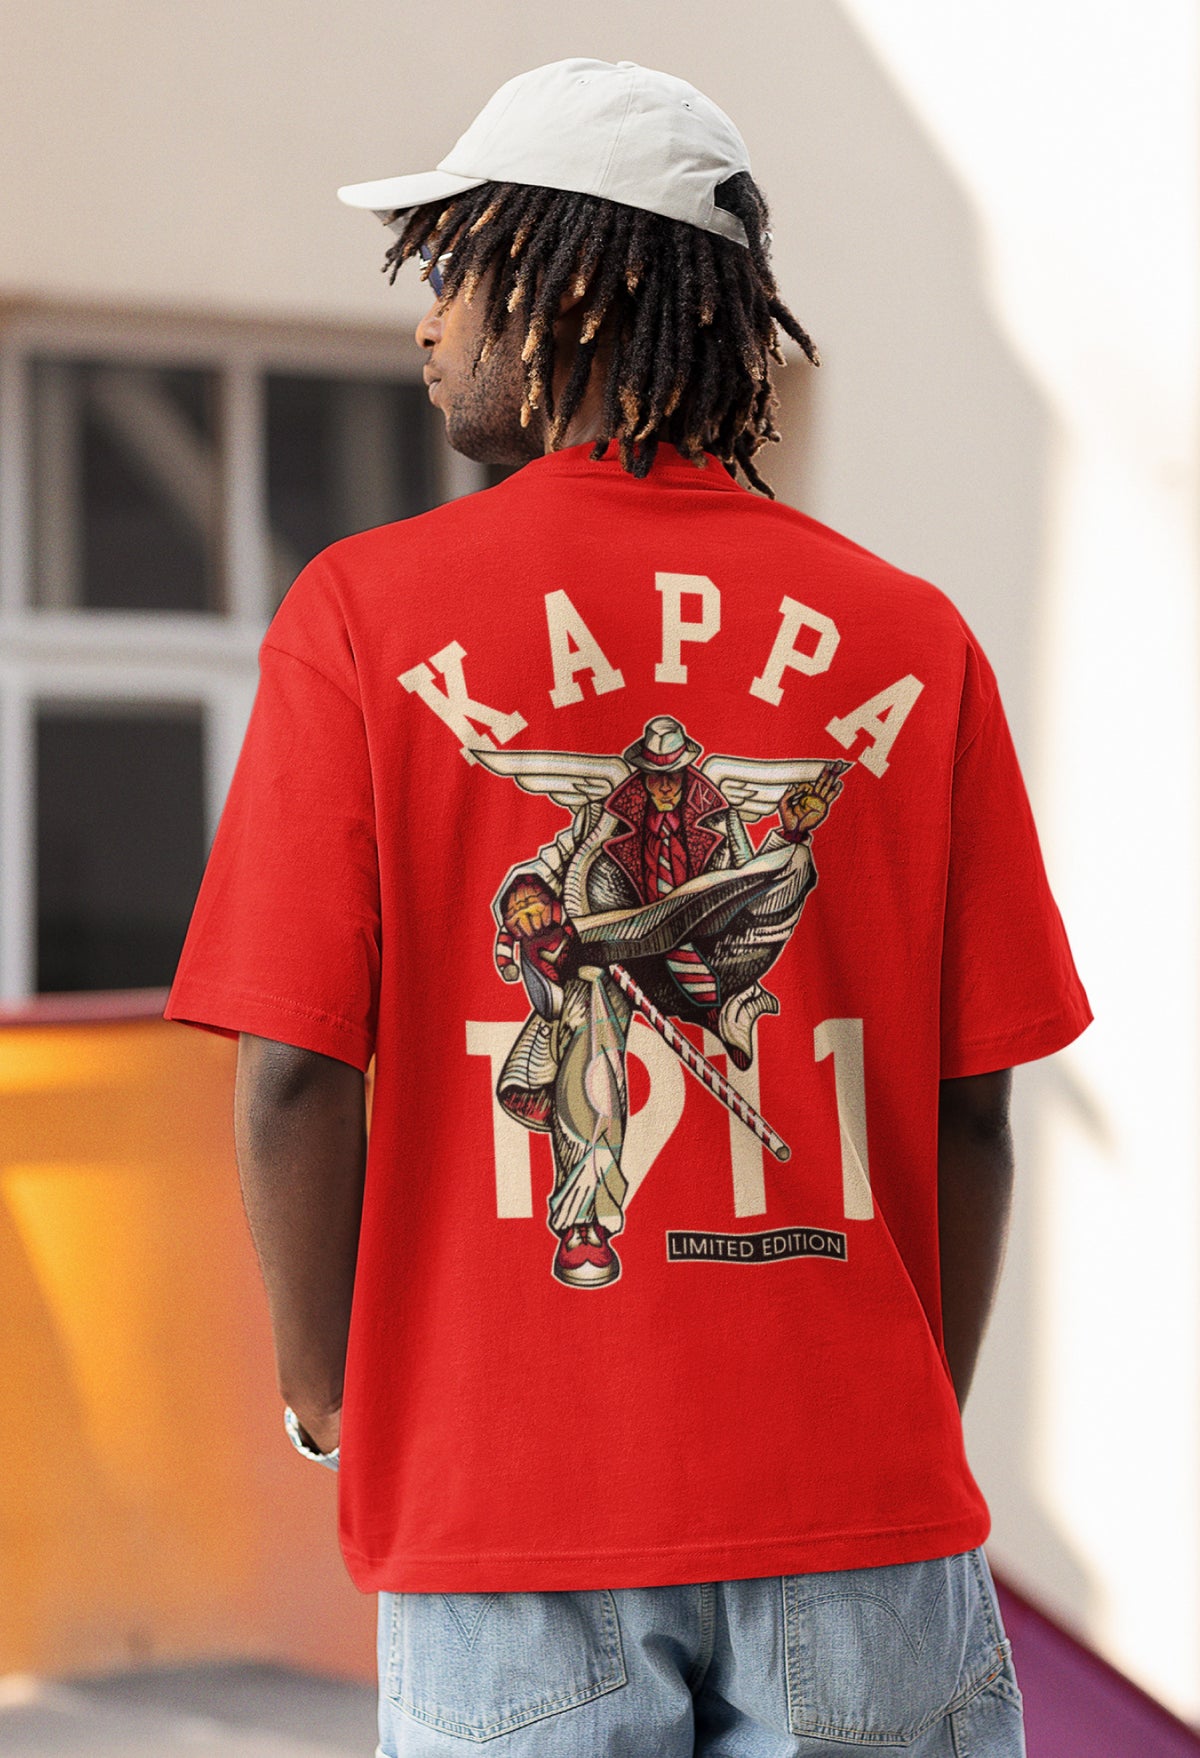 "1911 Kappa" Limited Red Men's Tee